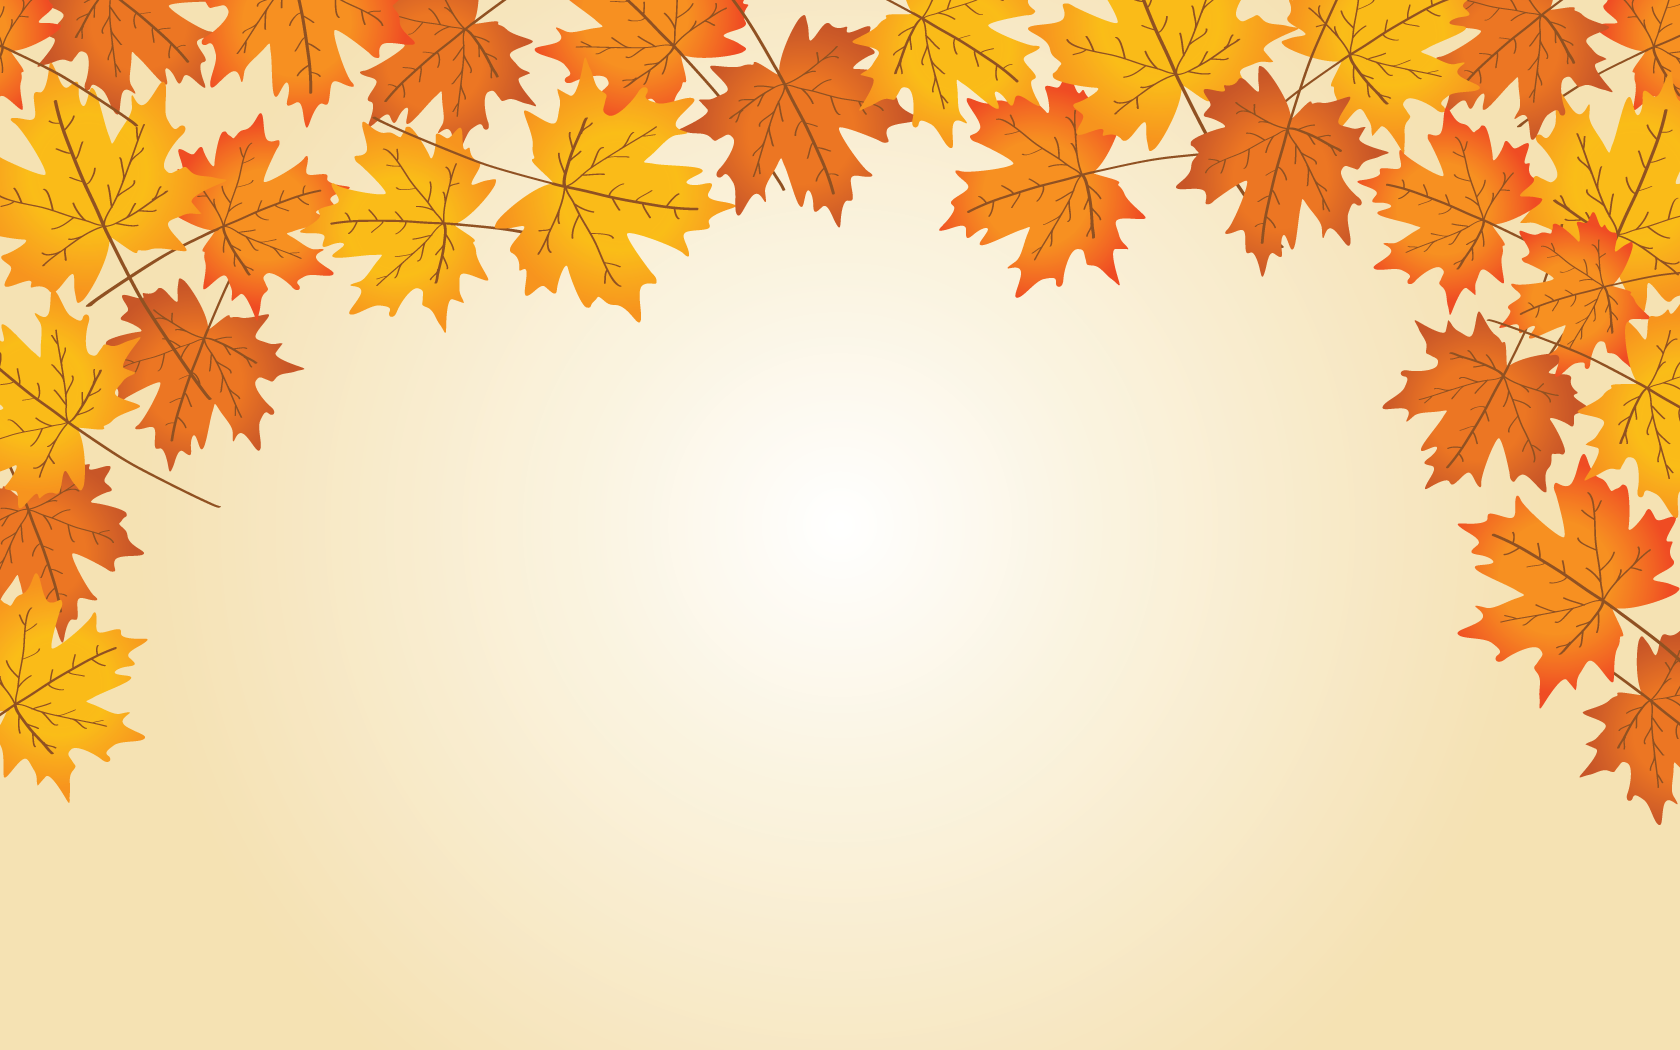 happy backgrounds tumblr 19 Background Fall  Leaves Fall Vector Background Images